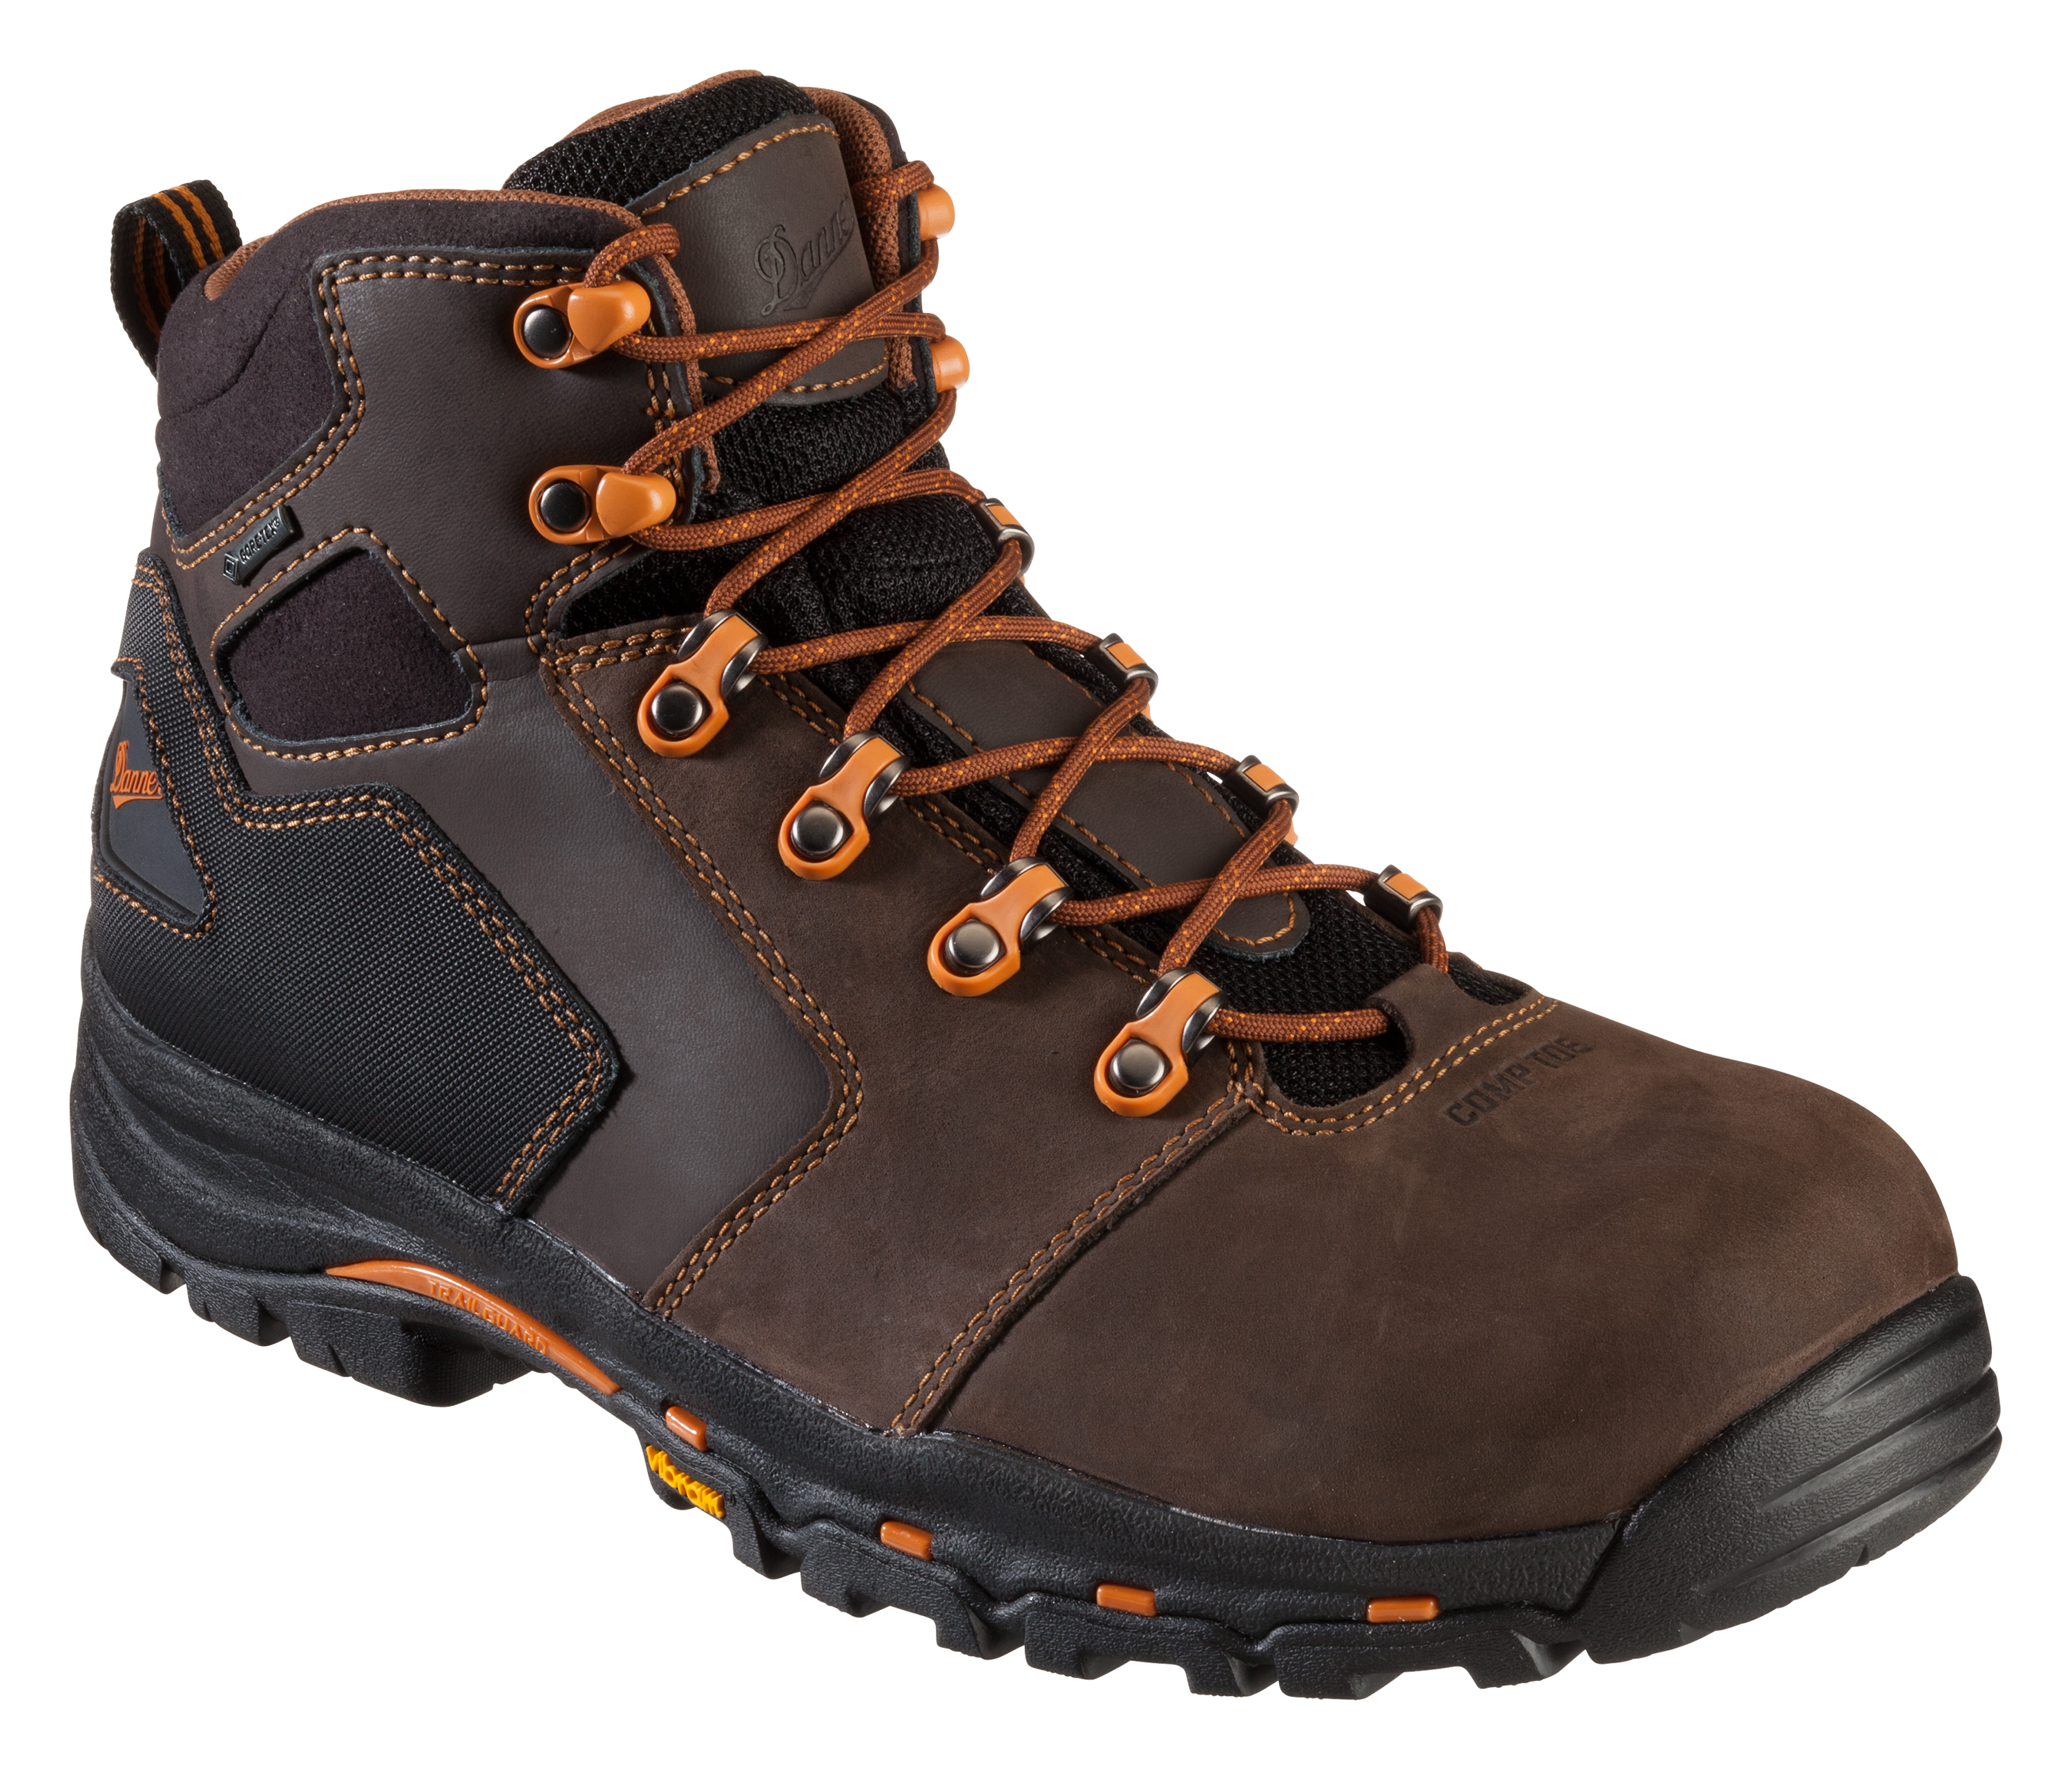 Danner Vicious GORE-TEX Non-Metallic Safety Toe Work Boots for Men - Brown - 13W